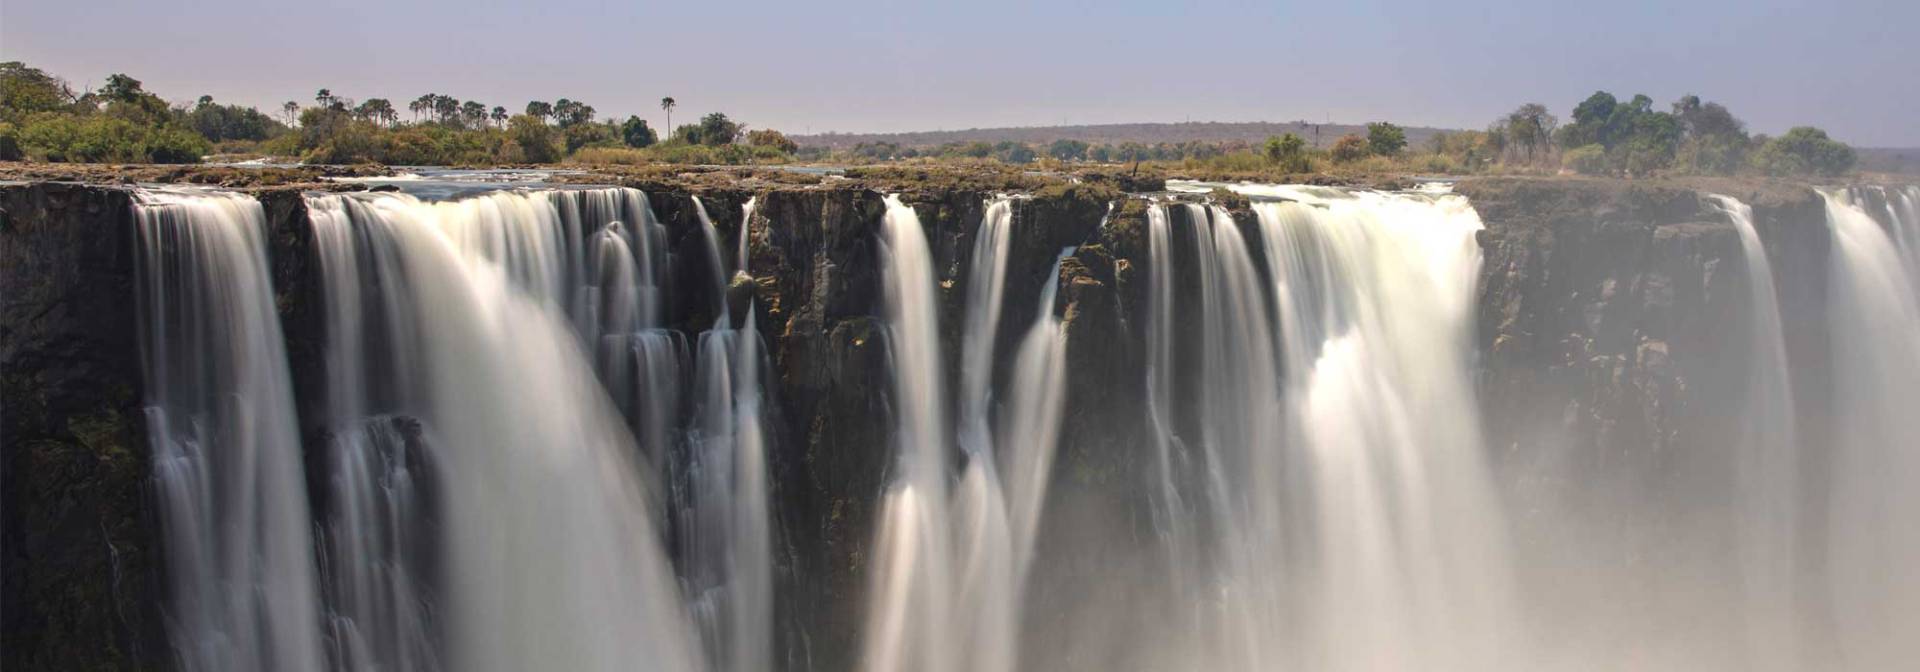 The world-famous Victoria Waterfalls